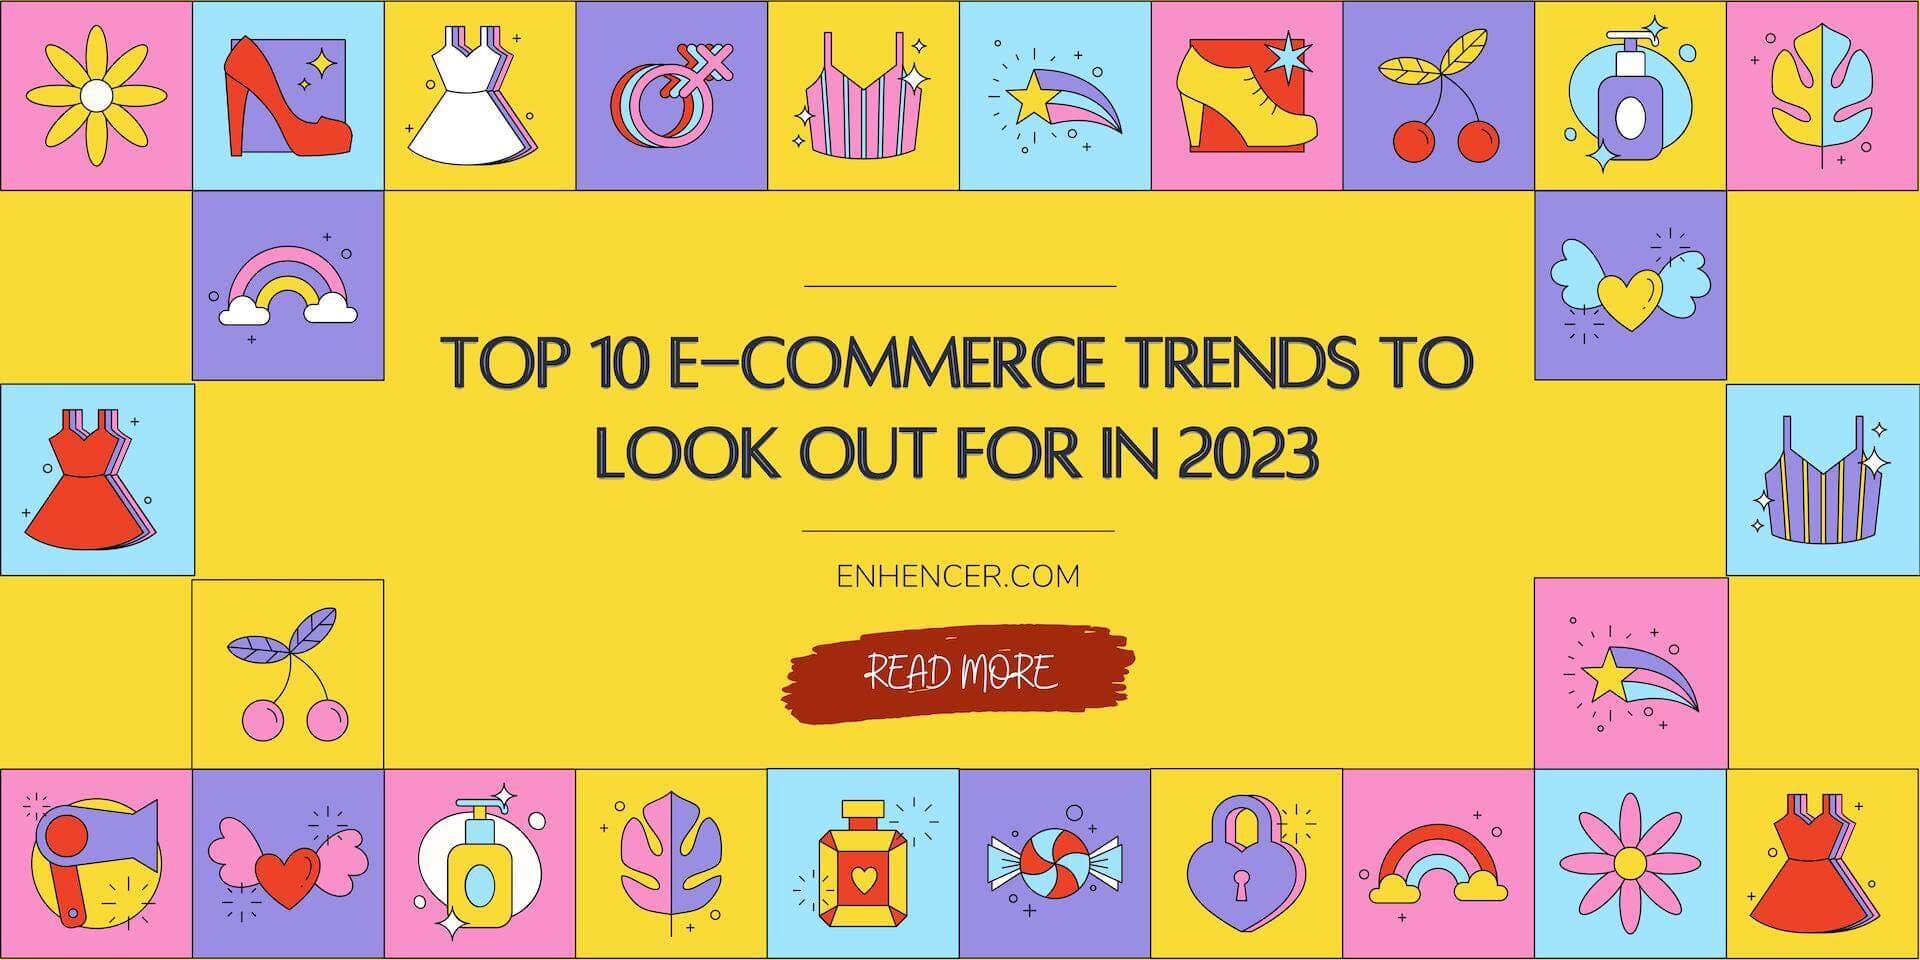 Top 10 E-commerce Trends to Look out for in 2023